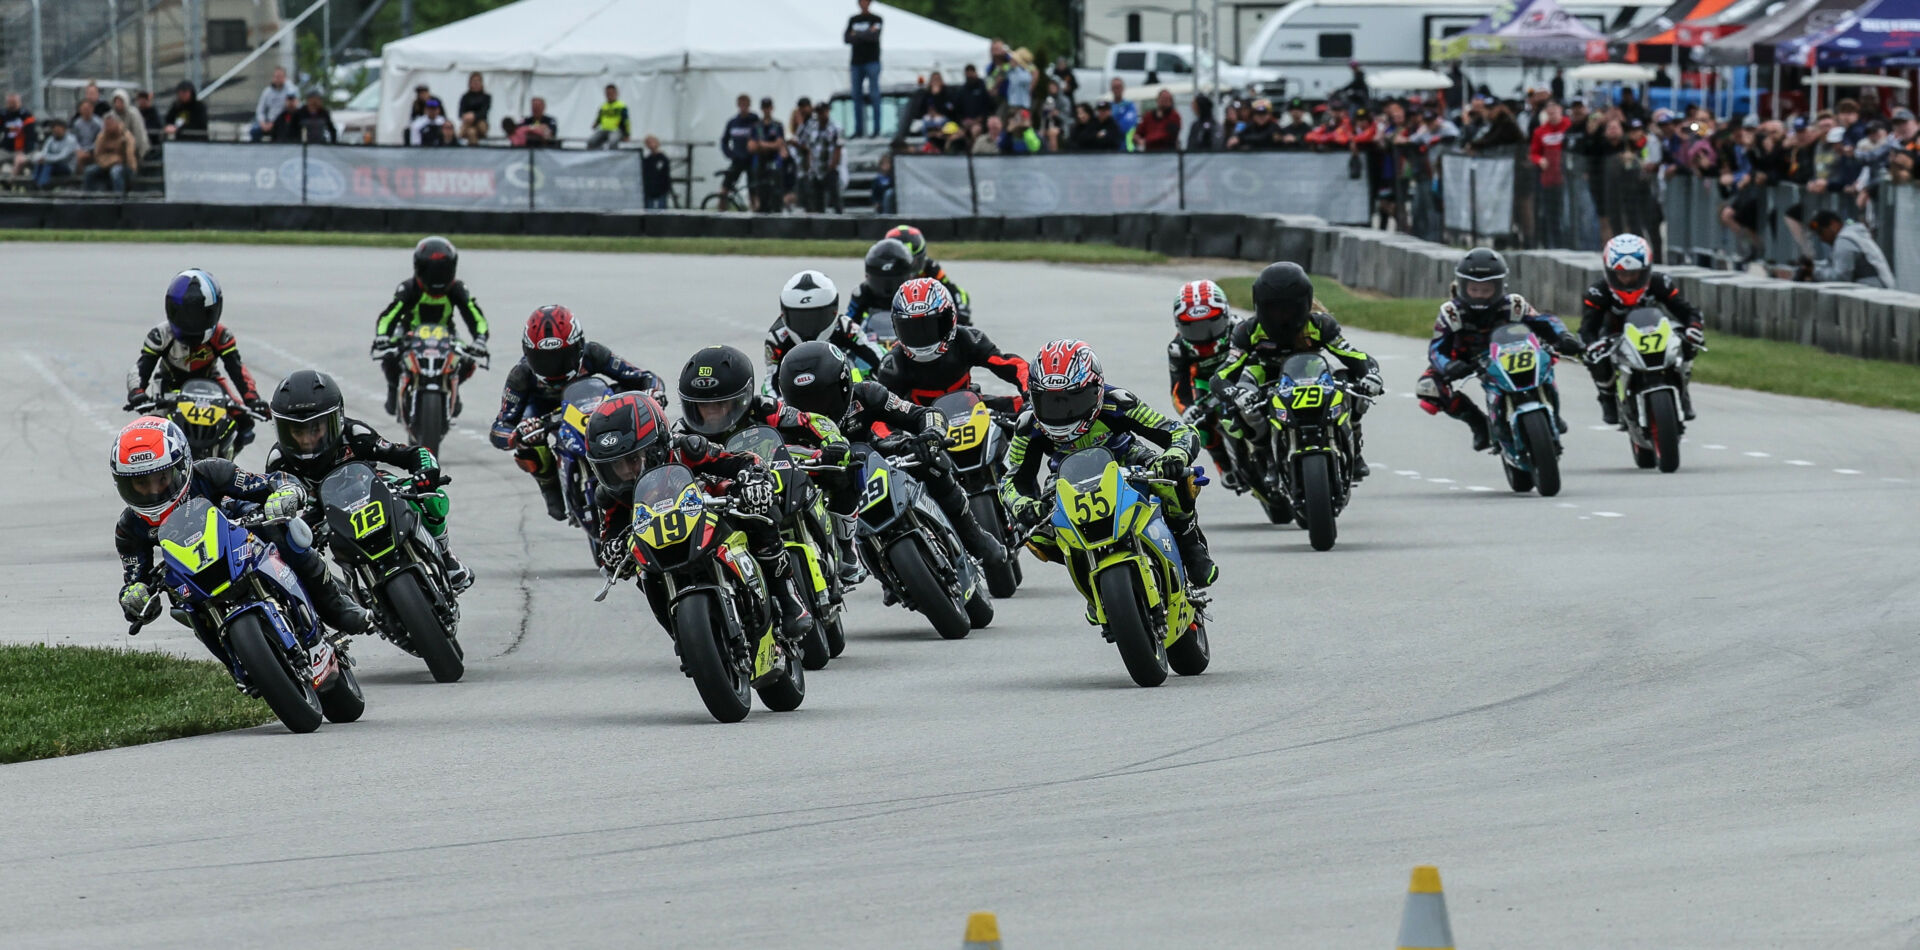 Dunlop will award Team Dunlop Elite sponsorships for the 2025 season during the MotoAmerica Mission Mini Cup by Motul National Final in August. Photo by Brian J. Nelson, courtesy Dunlop.